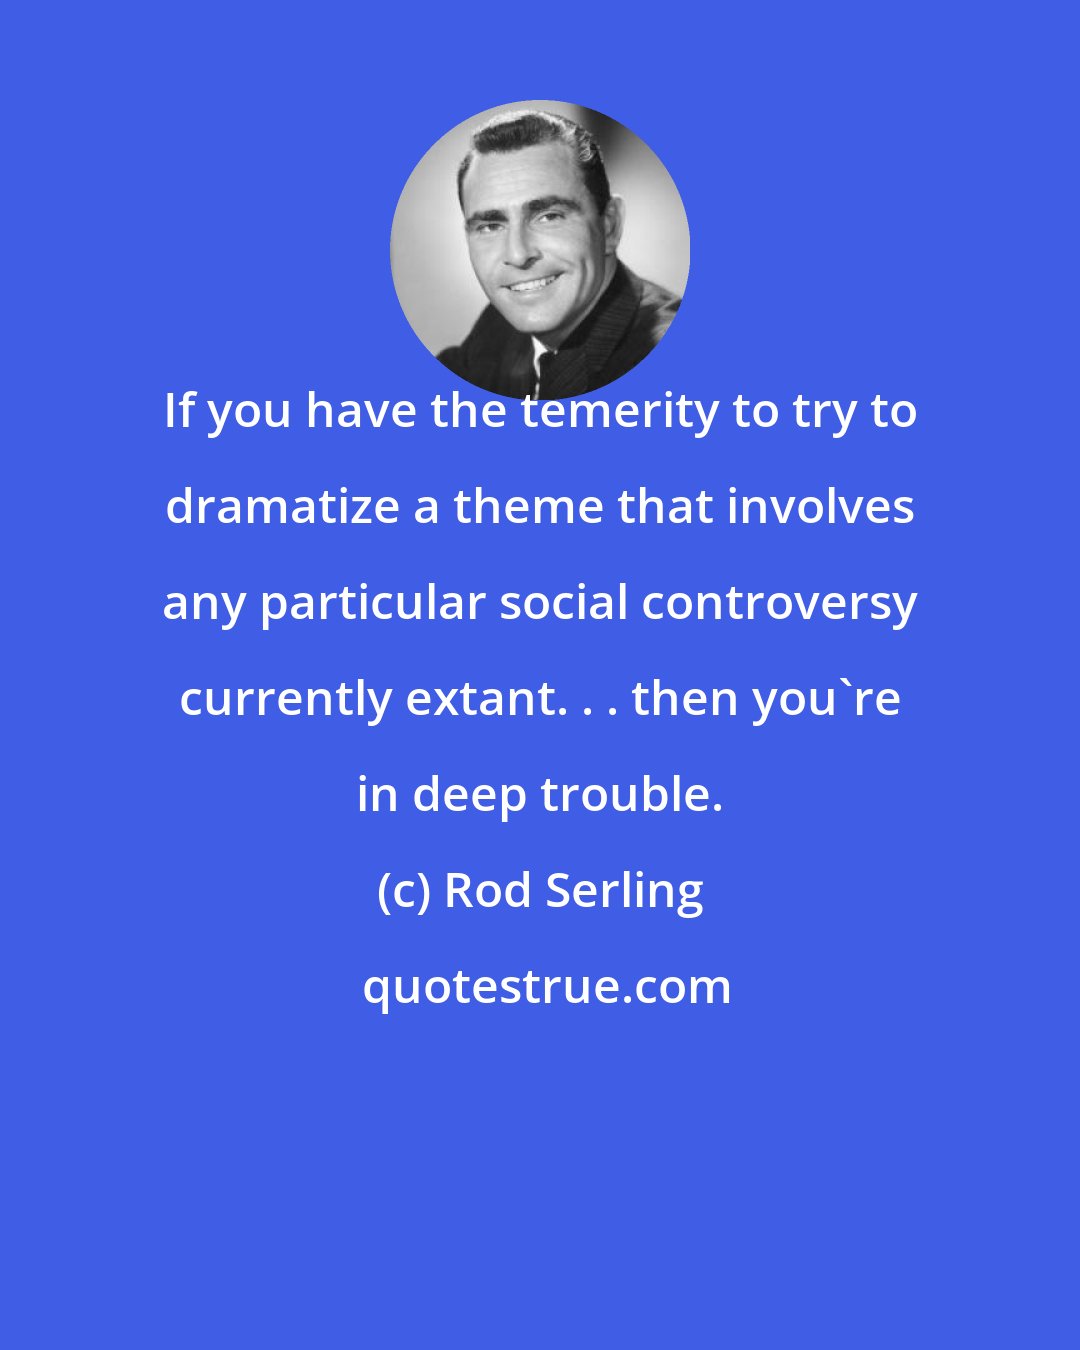 Rod Serling: If you have the temerity to try to dramatize a theme that involves any particular social controversy currently extant. . . then you're in deep trouble.